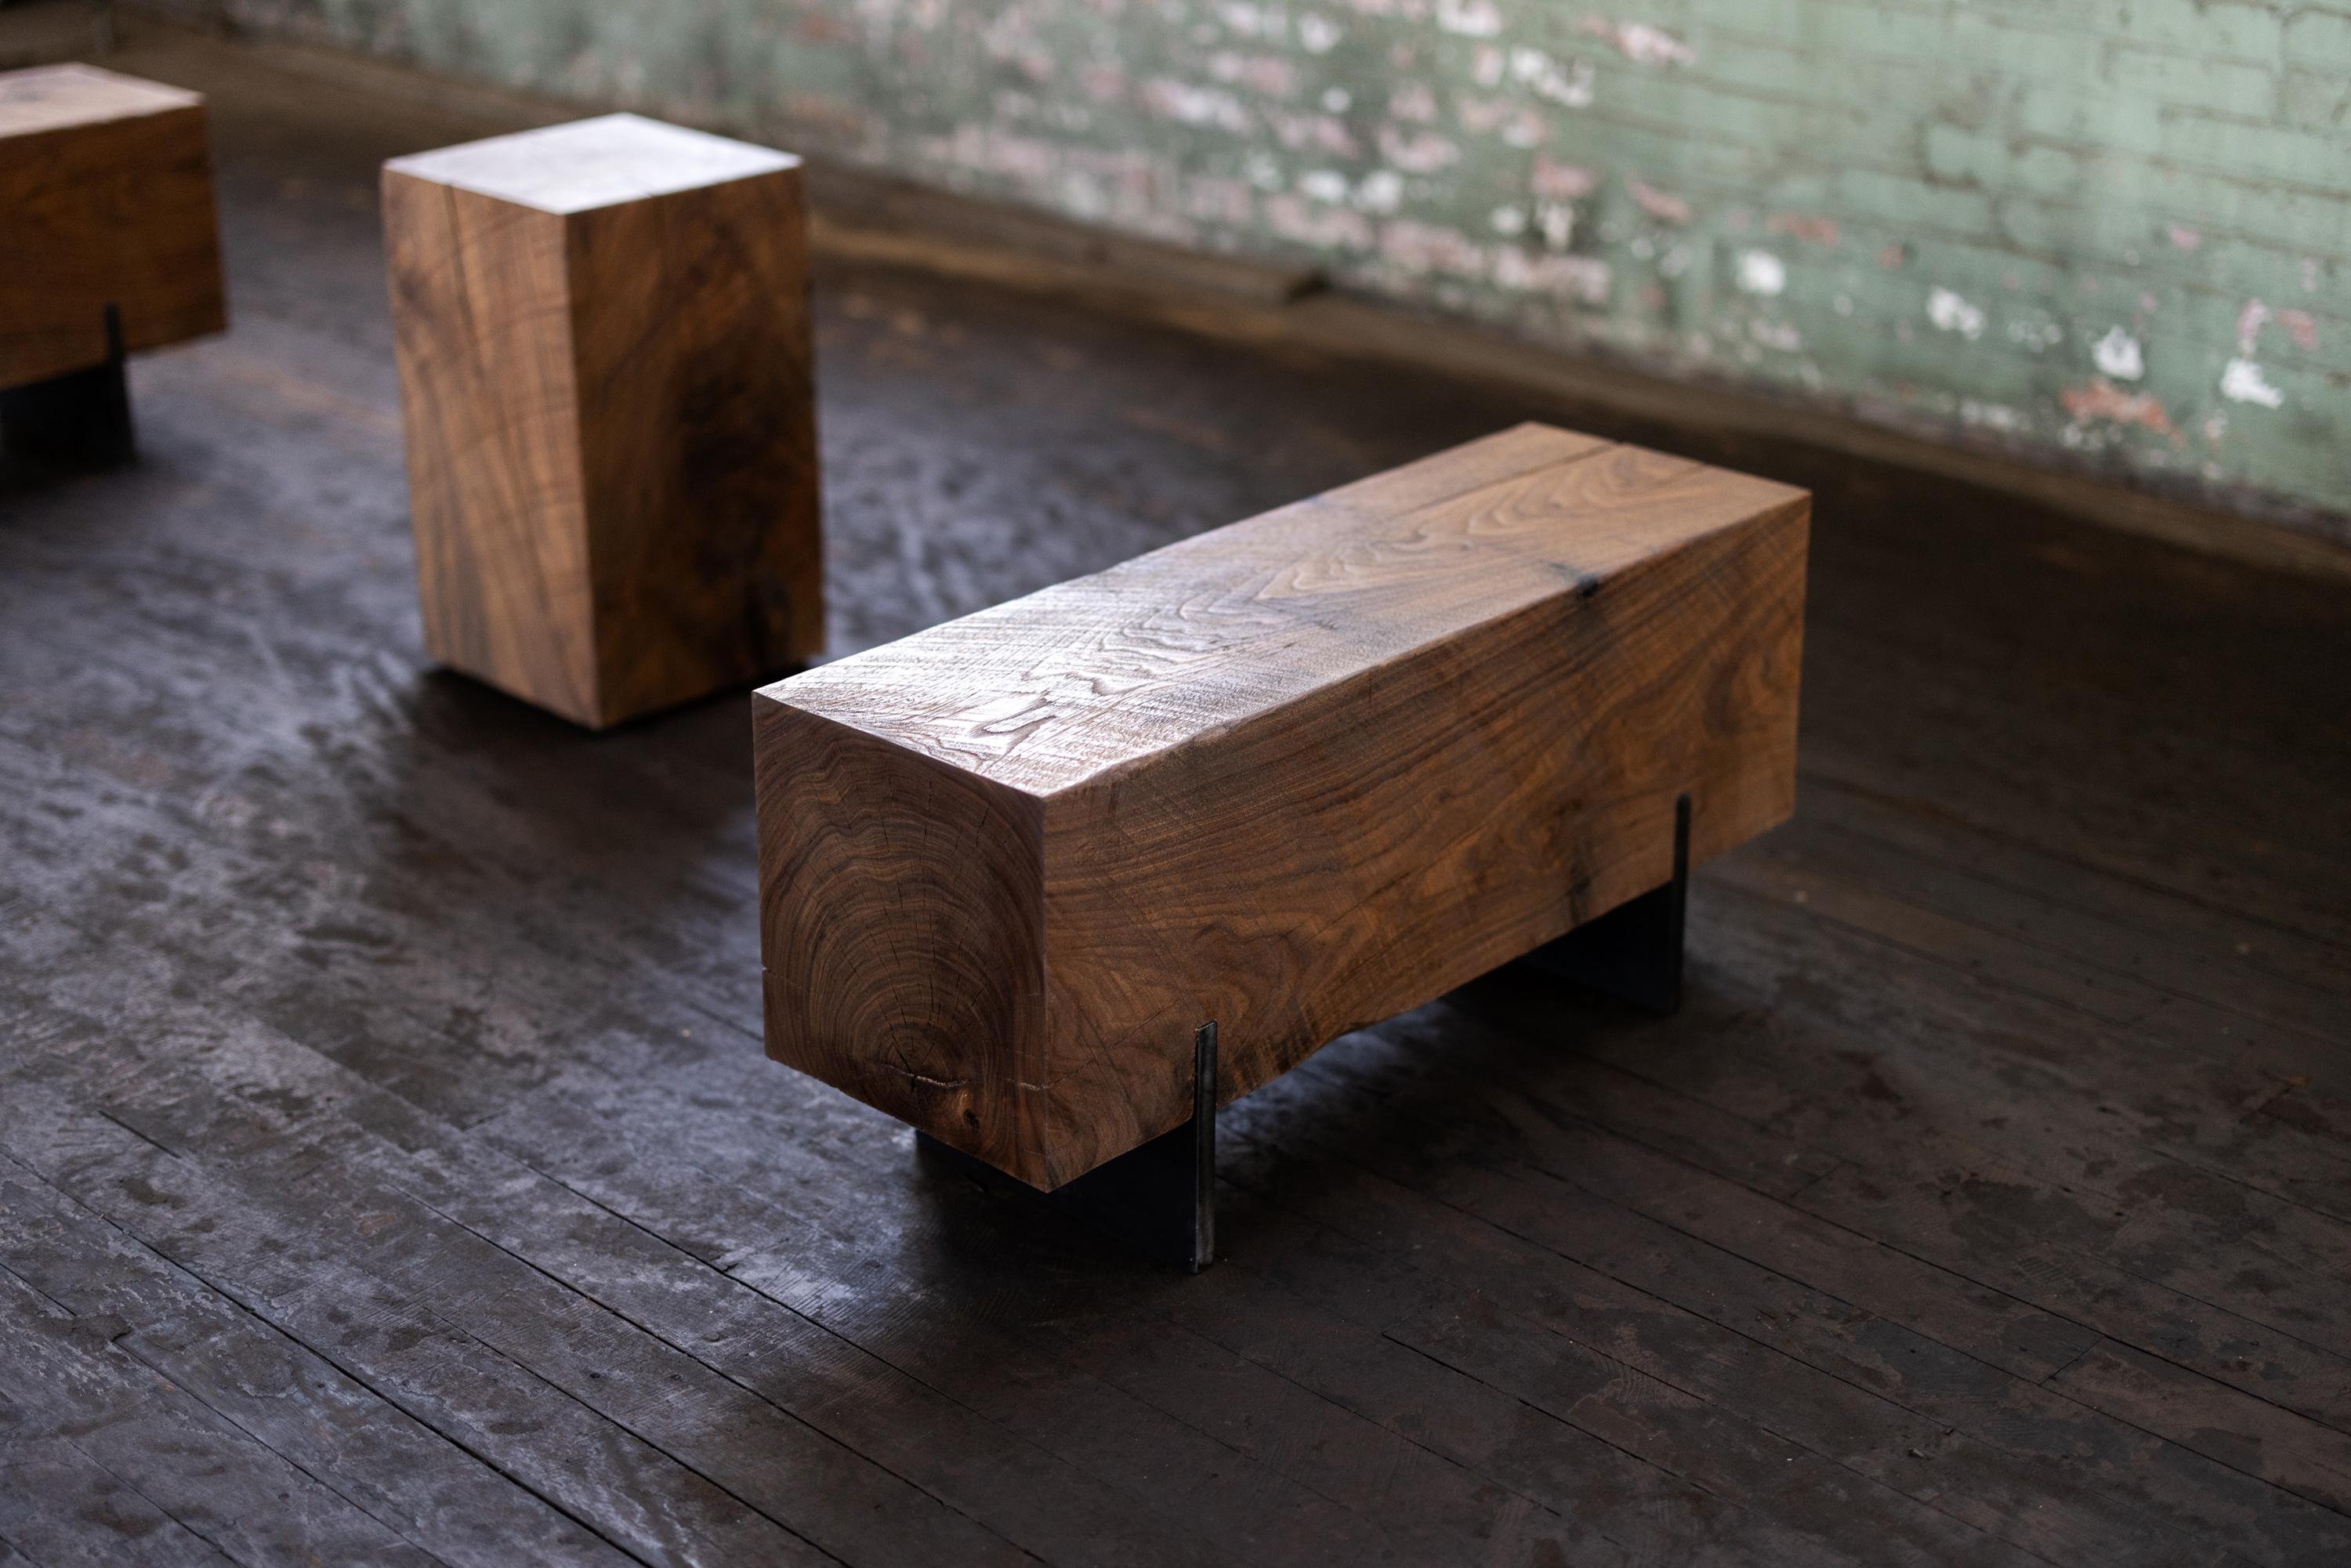 Our knife beam bench in walnut utilizes salvaged walnut wood logs for a rustic bench. Narrow and backless, the simple lines express the natural texture of the end grain of each species. The 12